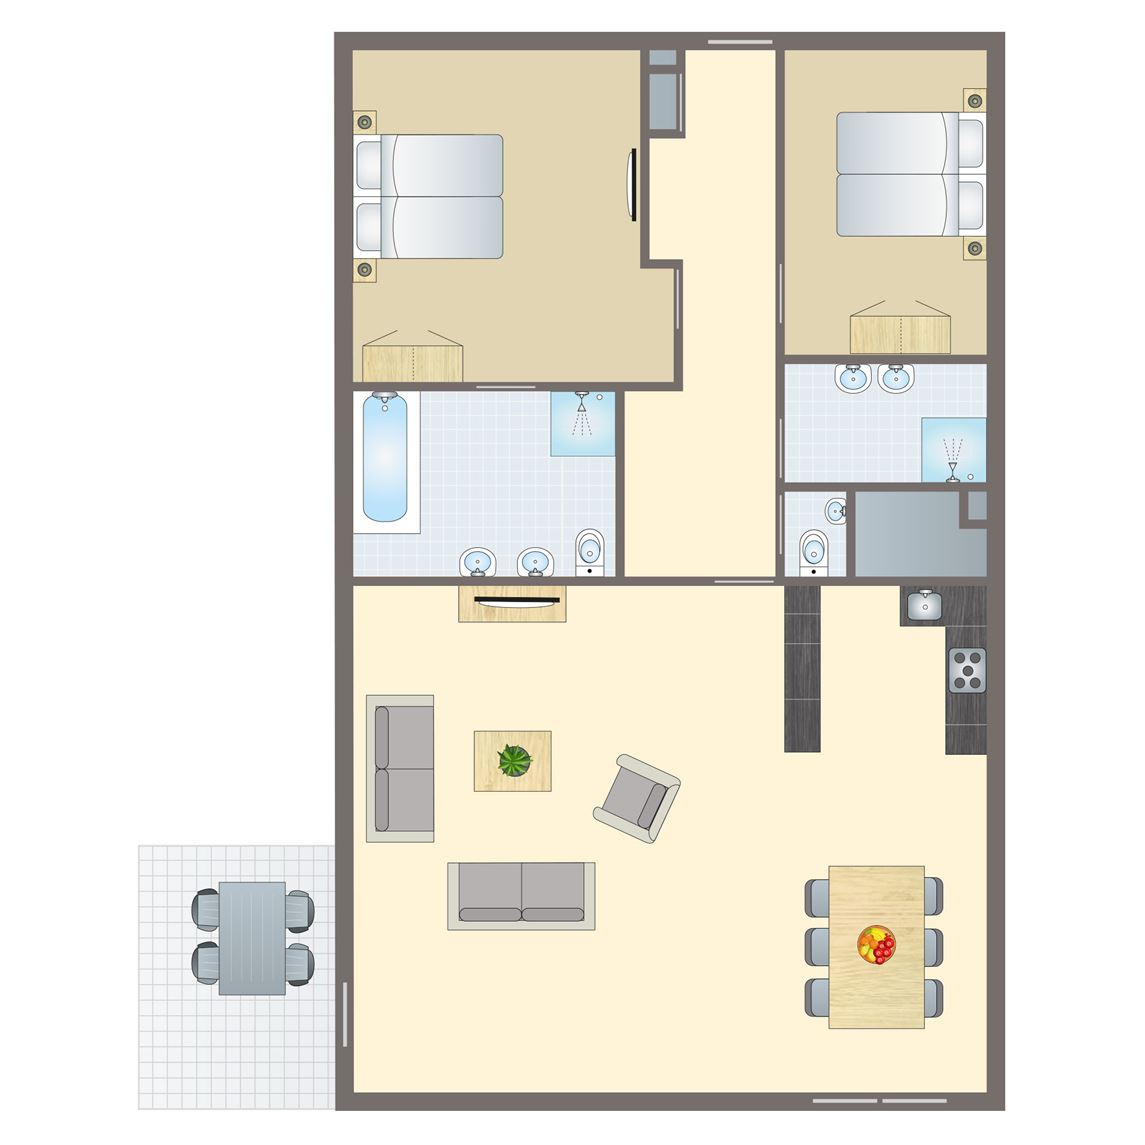 4-persoons appartement